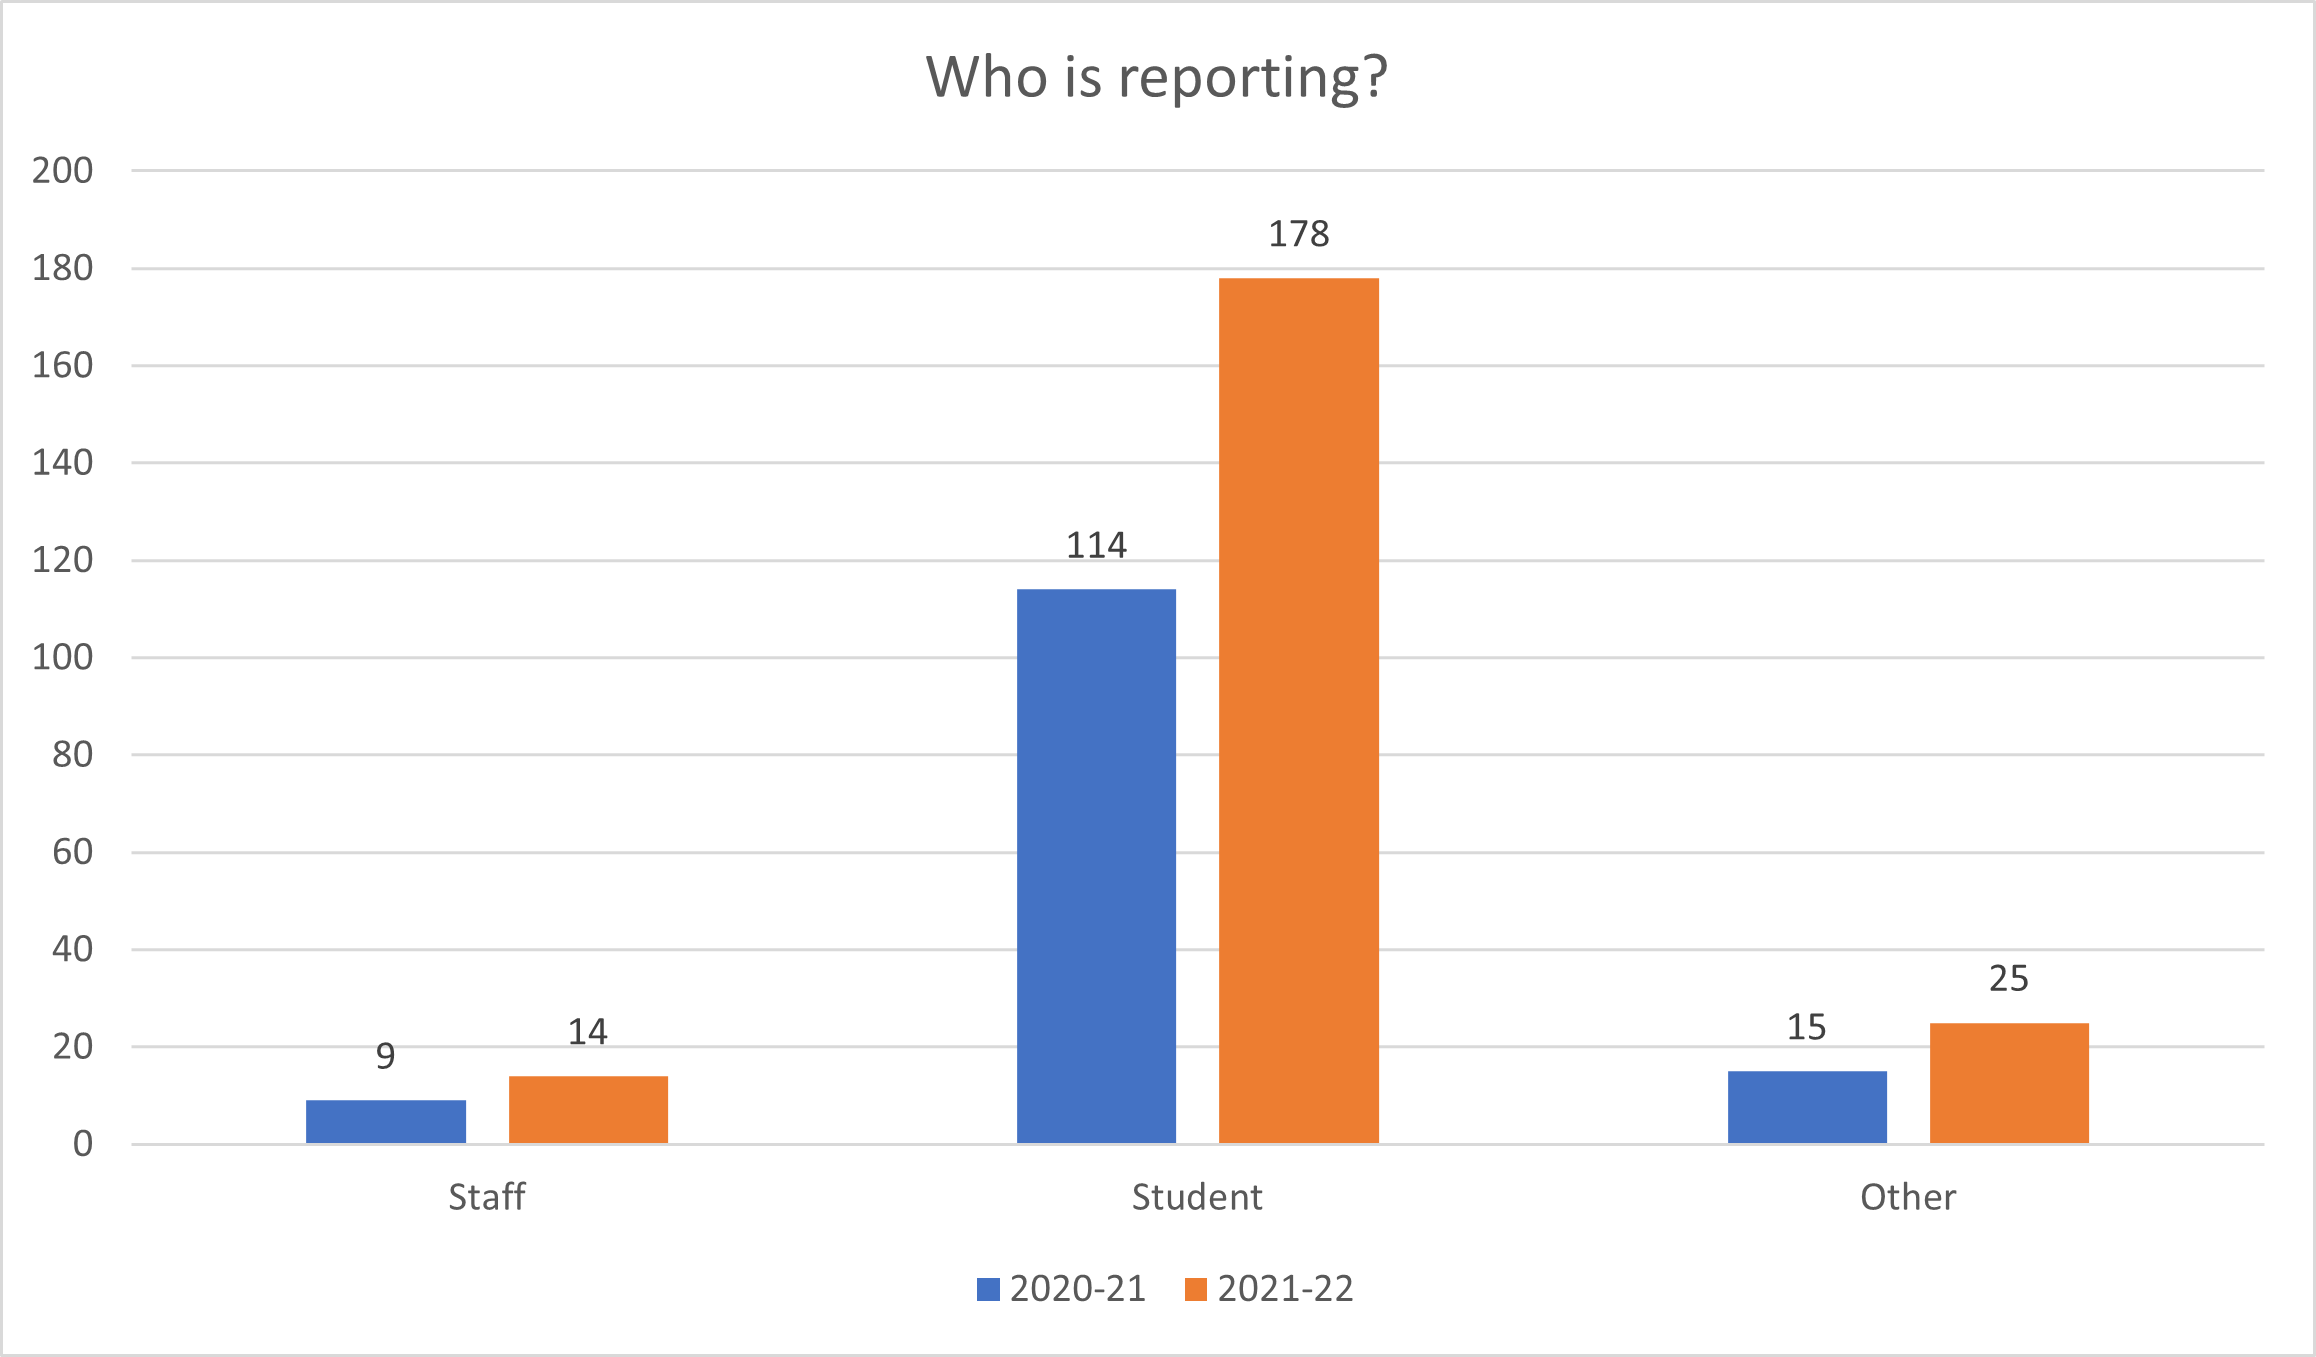 Data on who is reporting